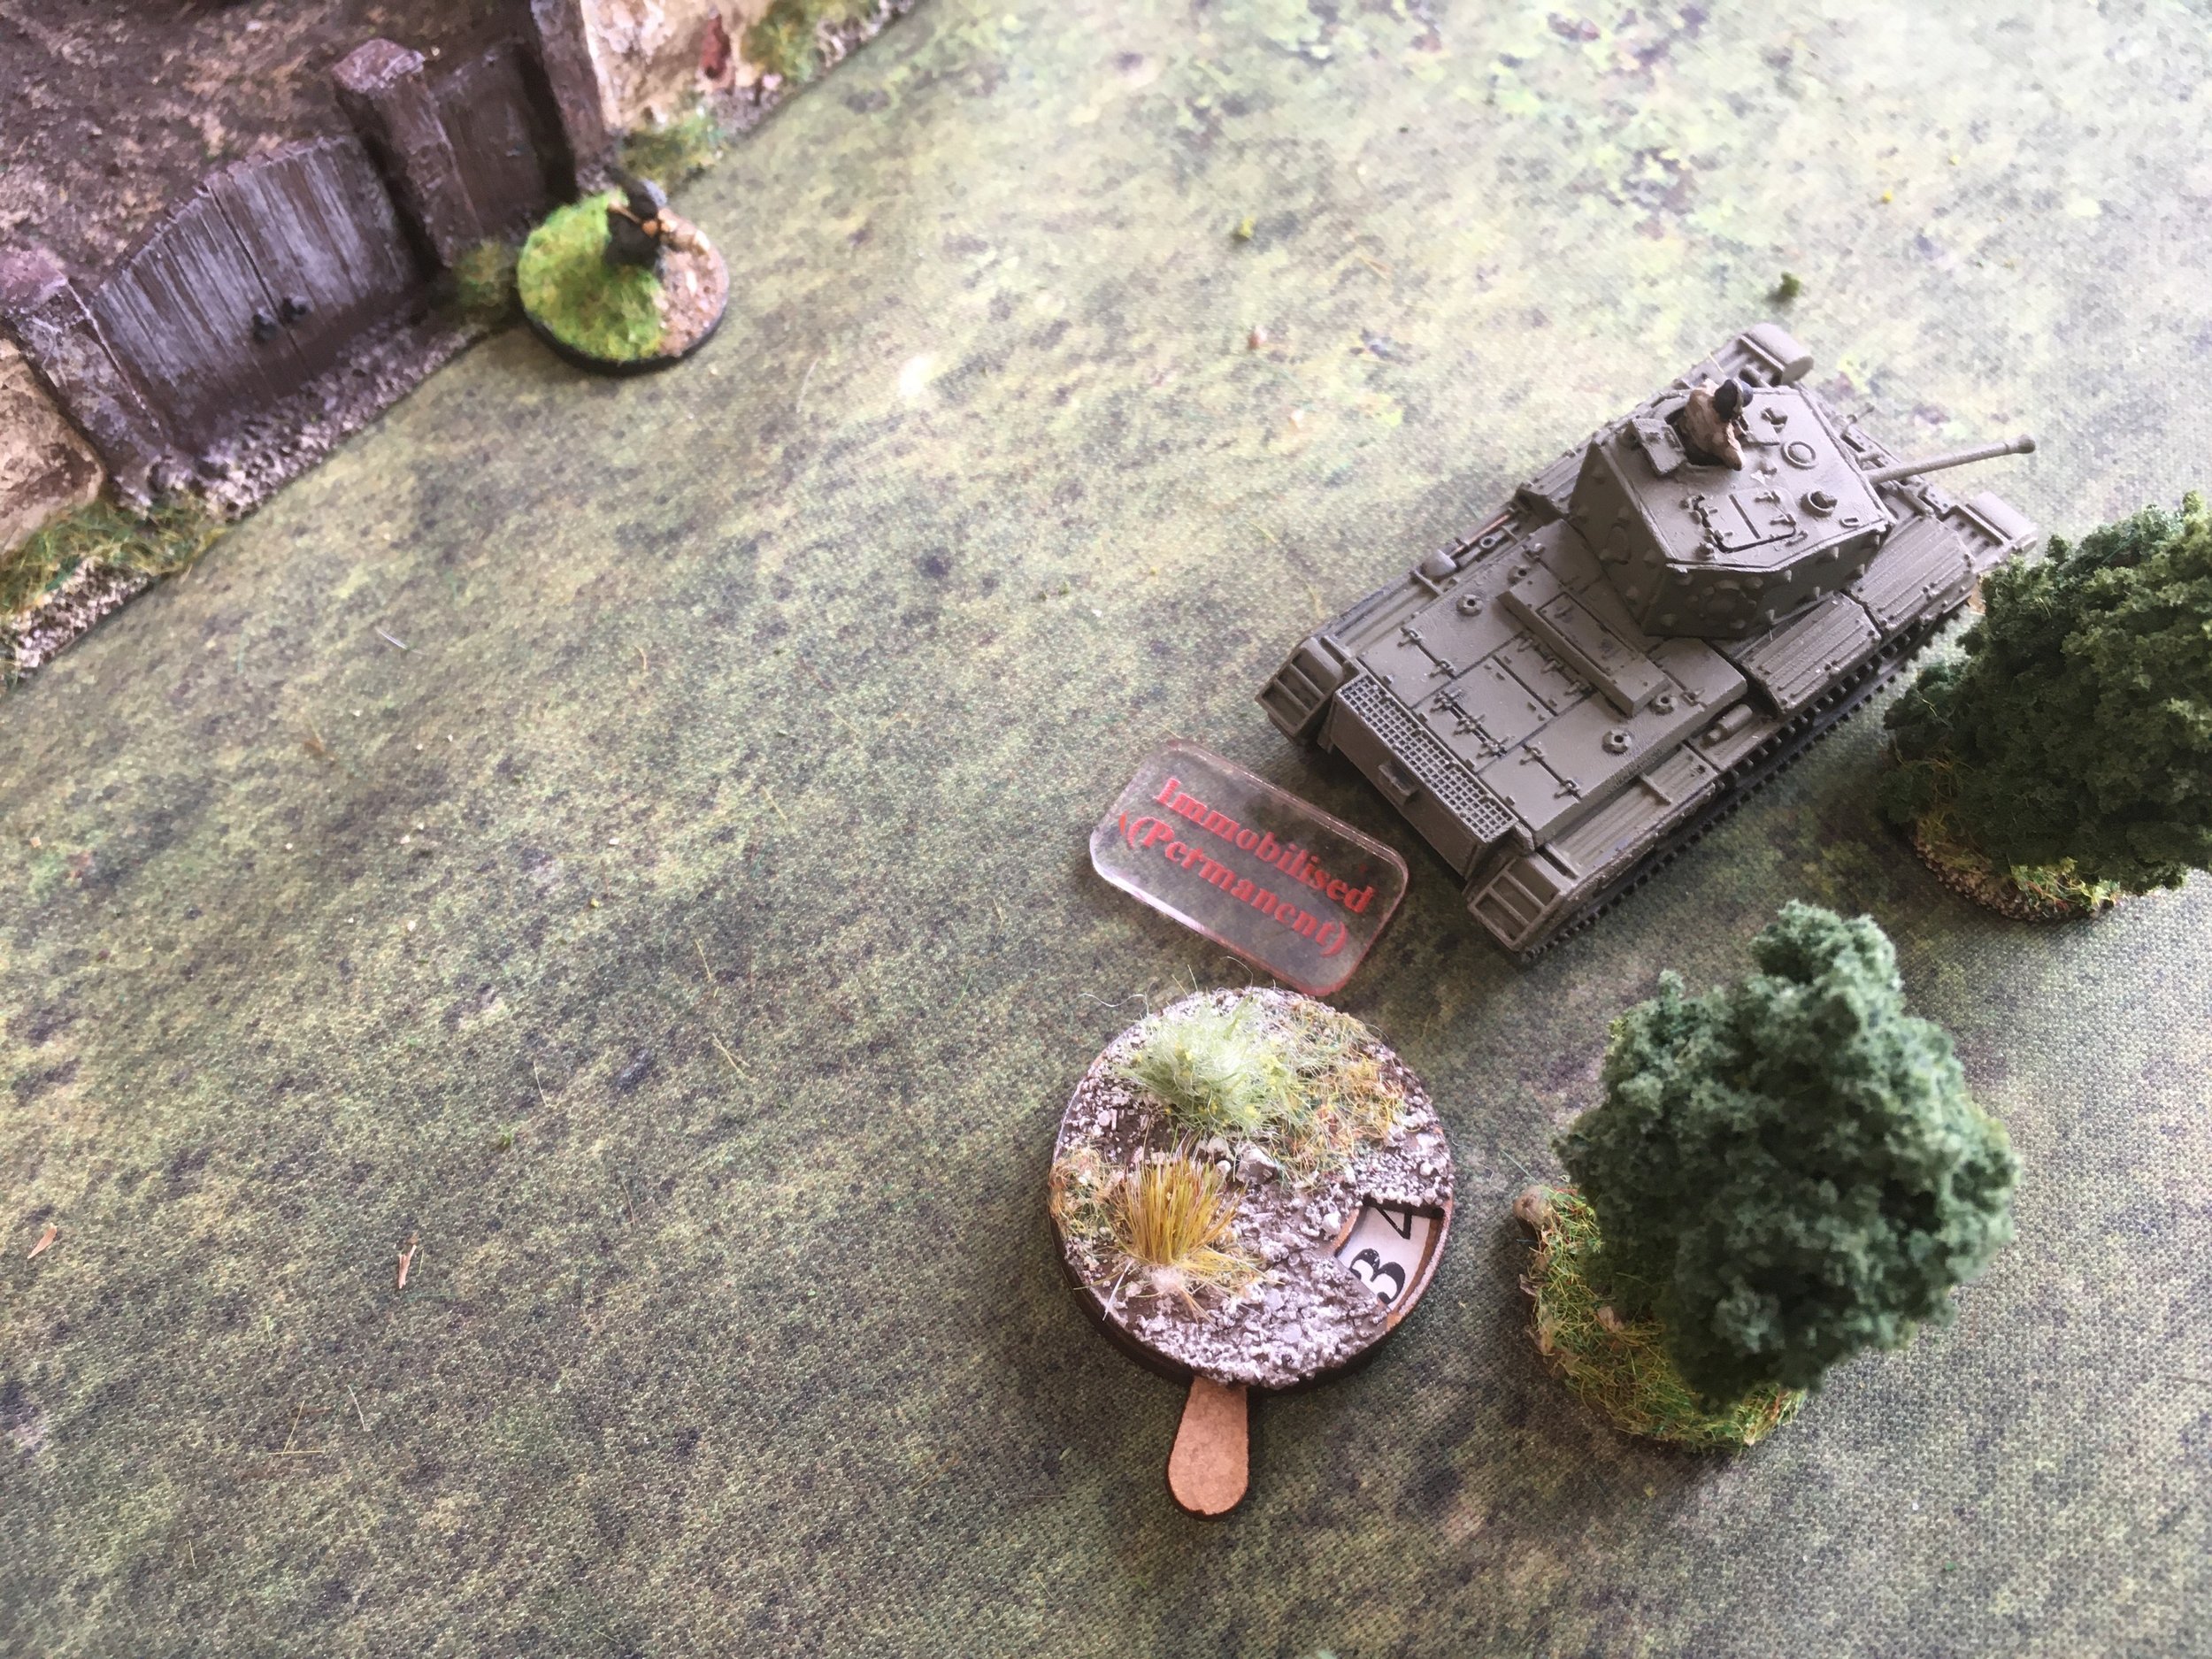 A last roll of the dice for Chris - and his luck held, the Cromwell was immobilised! Cachu! (as they apparently say in the Valleys).